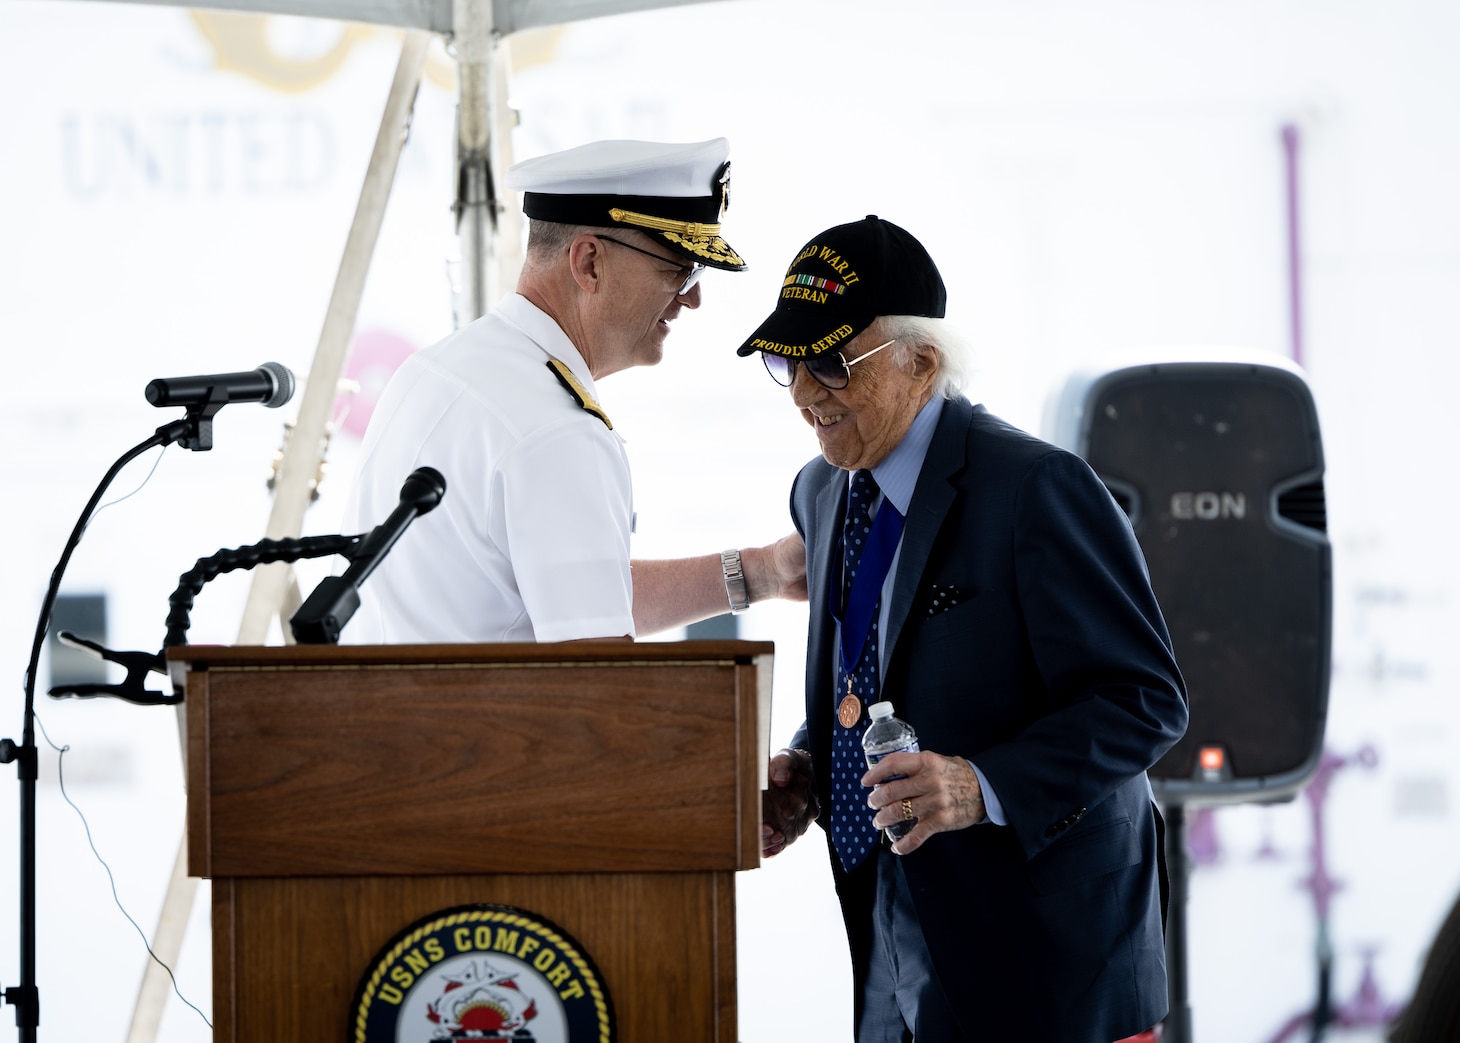 Dave Yoho, U.S. Merchant Marine and World War II Veteran, is greeted at the podium by Rear Adm. Michael Wettlaufer, USN Commander, Military Sealift Command (MSC), during MSC’s National Maritime Day ceremony aboard USNS Comfort (T-AH 20) May 22, 2023. National Maritime Day honors the thousands of dedicated merchant mariners who served aboard United States vessels around the world.